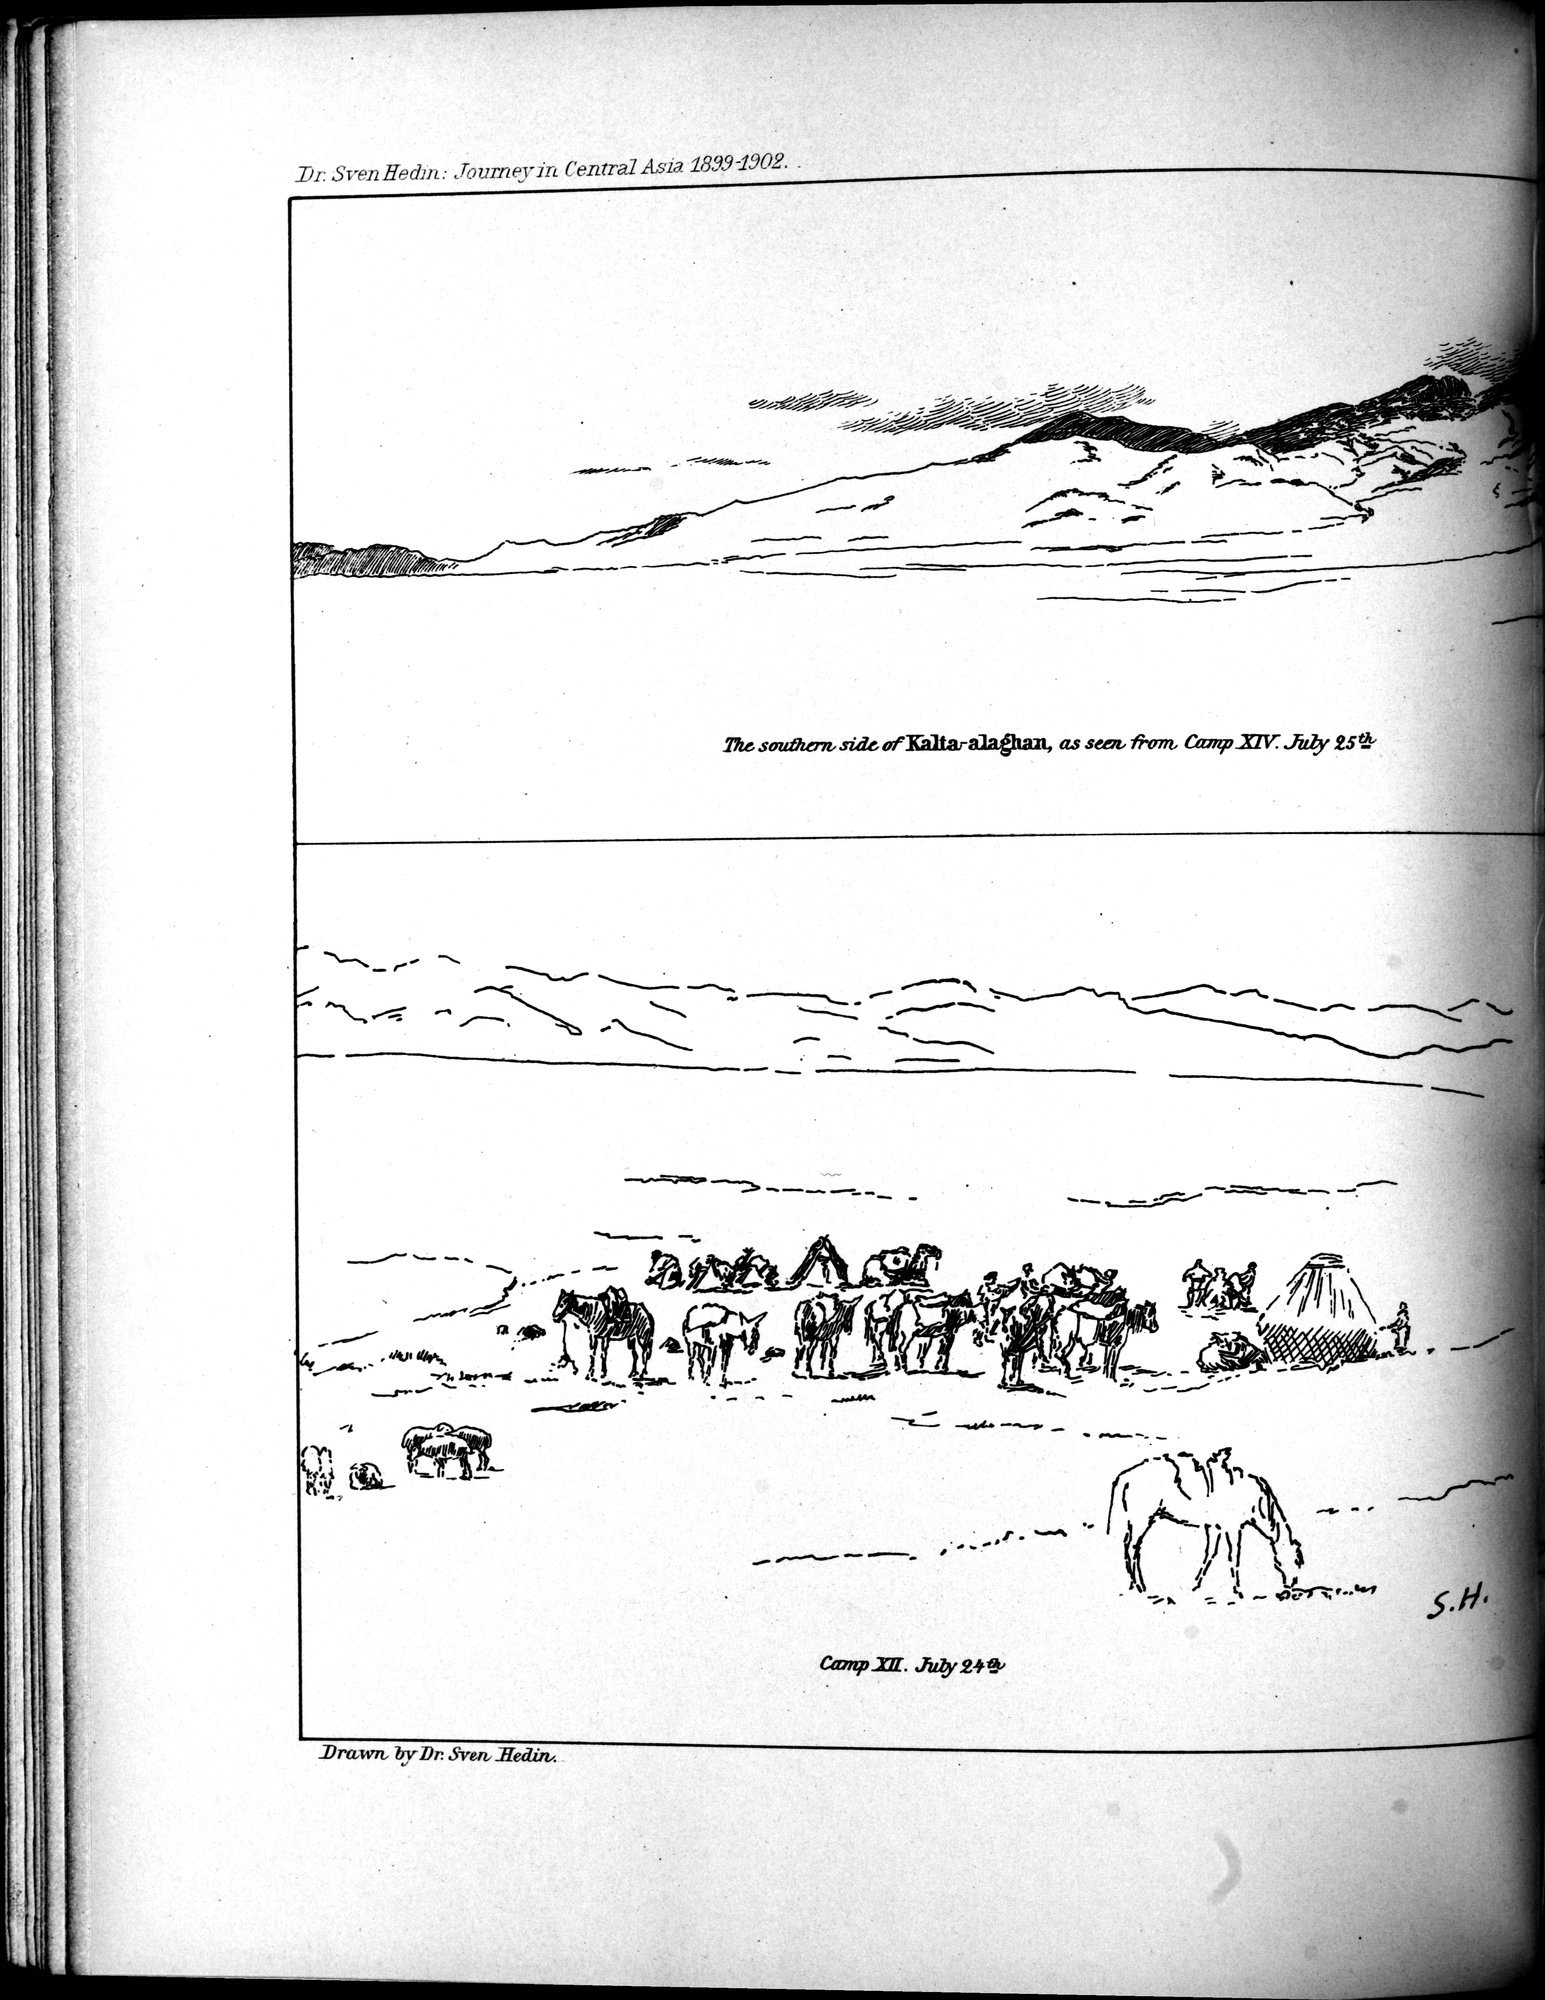 Scientific Results of a Journey in Central Asia, 1899-1902 : vol.3 / 56 ページ（白黒高解像度画像）